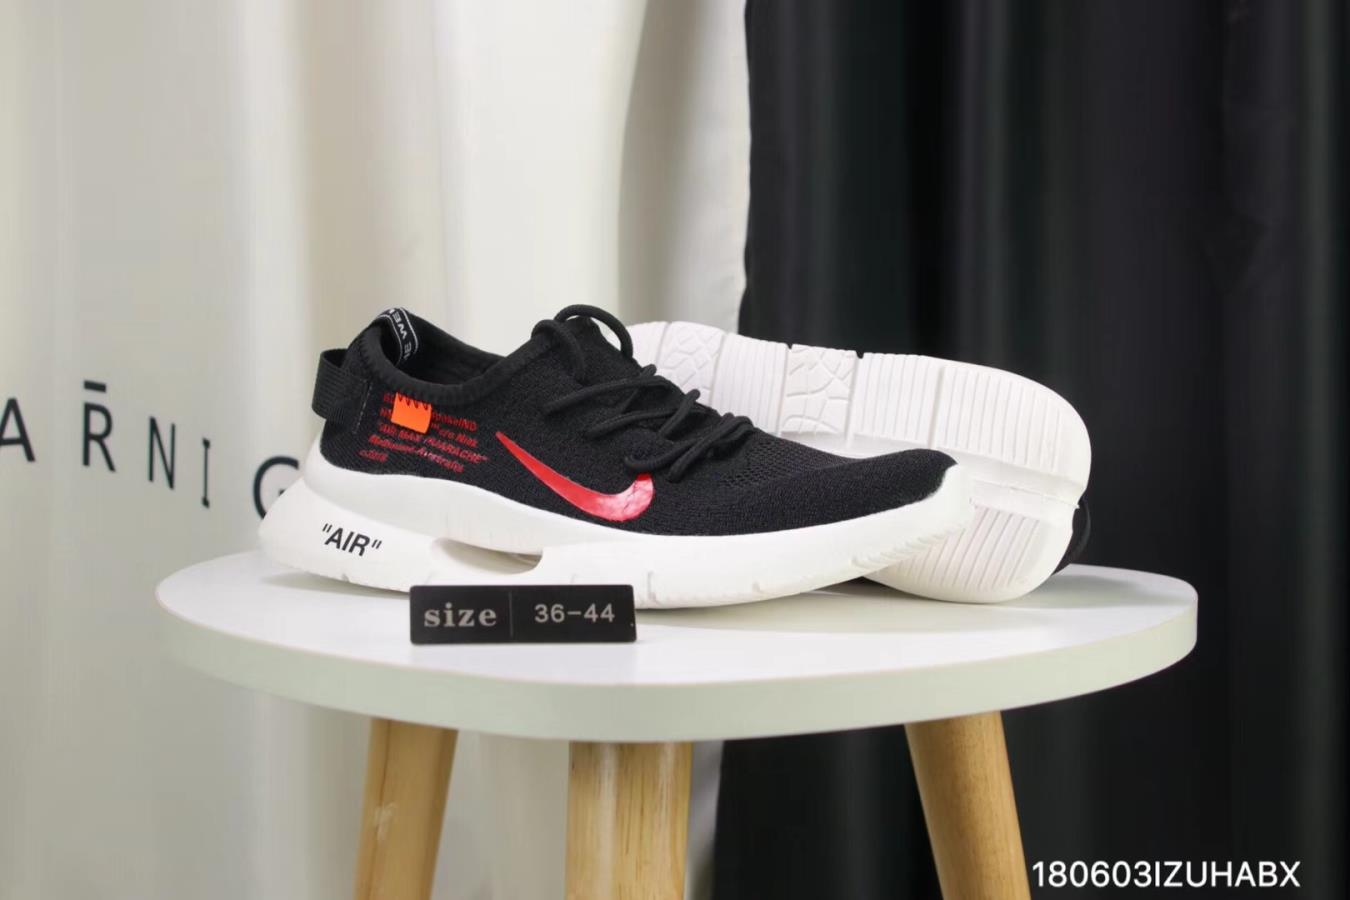 Off-white the Nike Air Max 87 OG Flyknit Black Red White Shoes